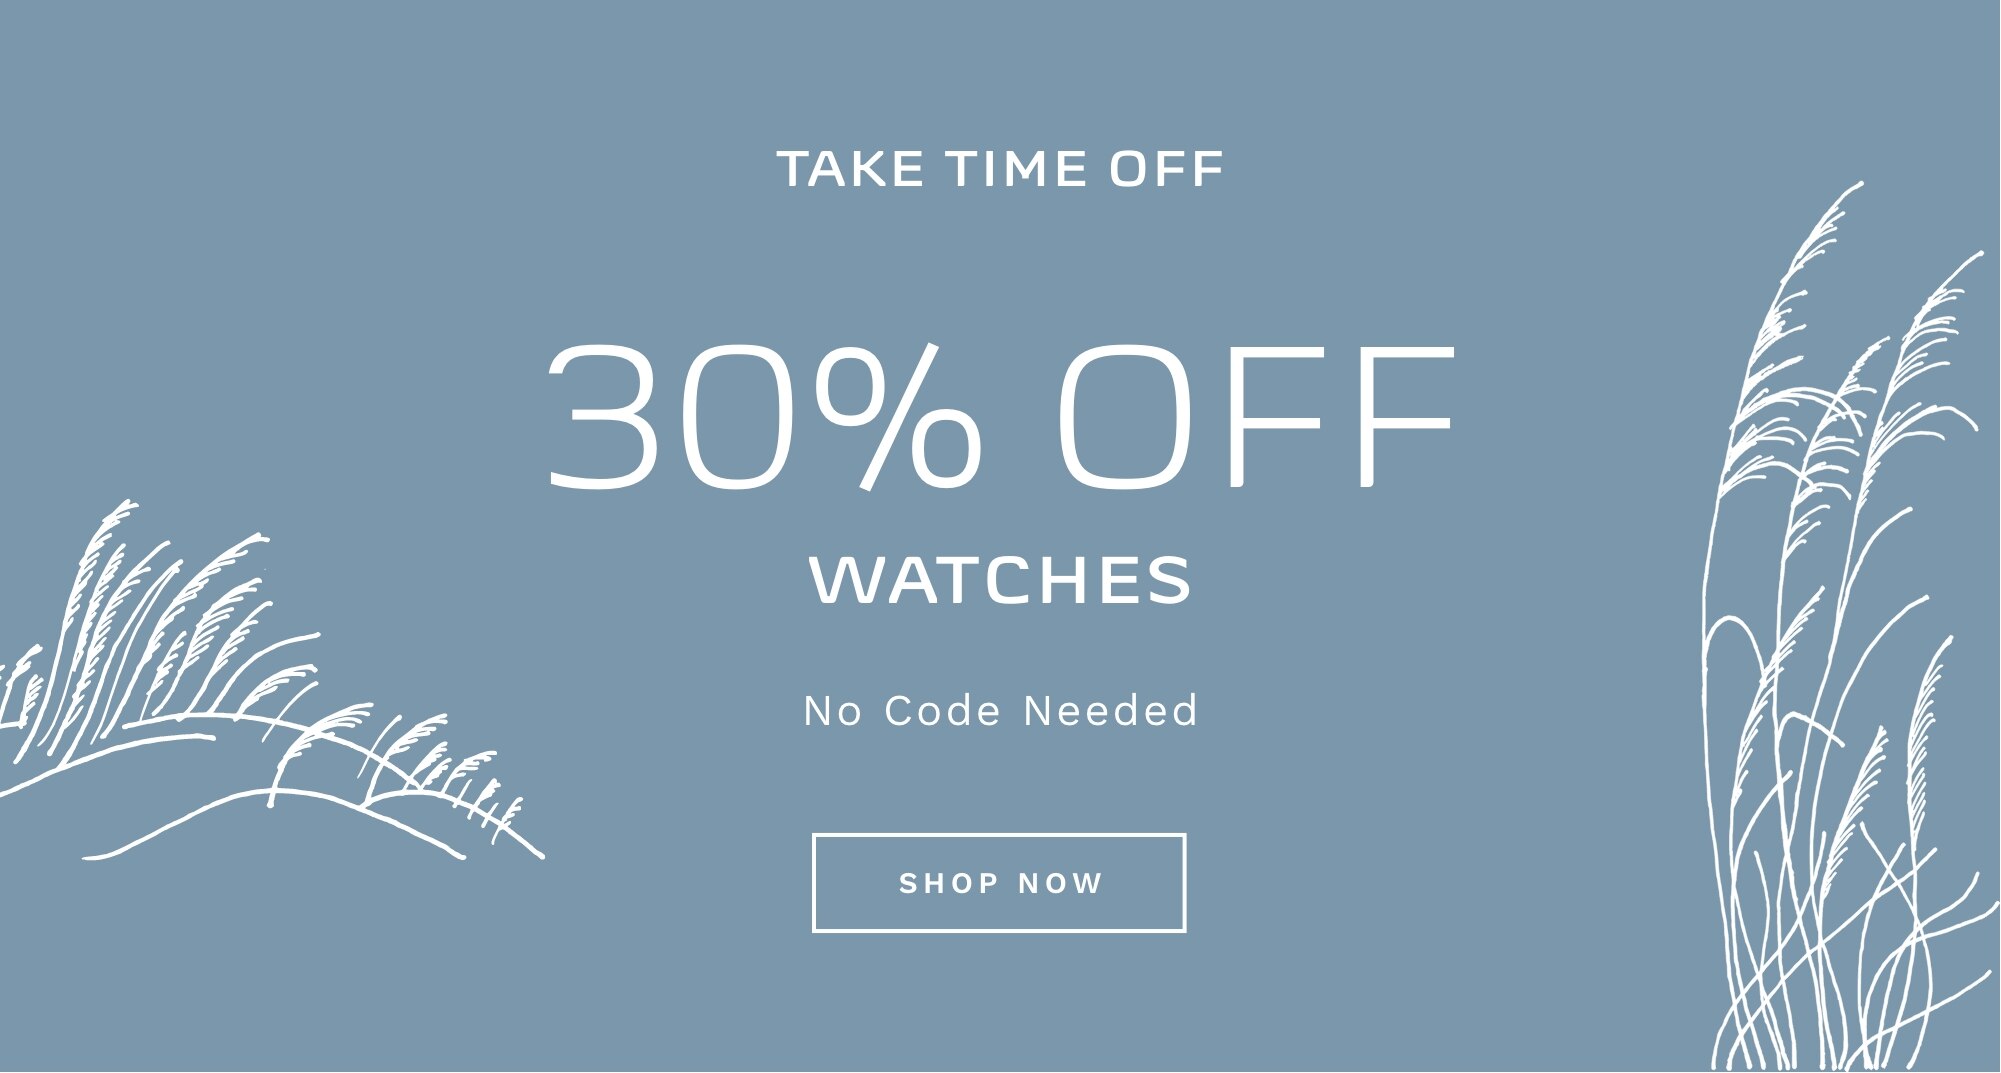 TAKE TIME OFF 30% OFF WATCHES No Code Needed SHOP NOW